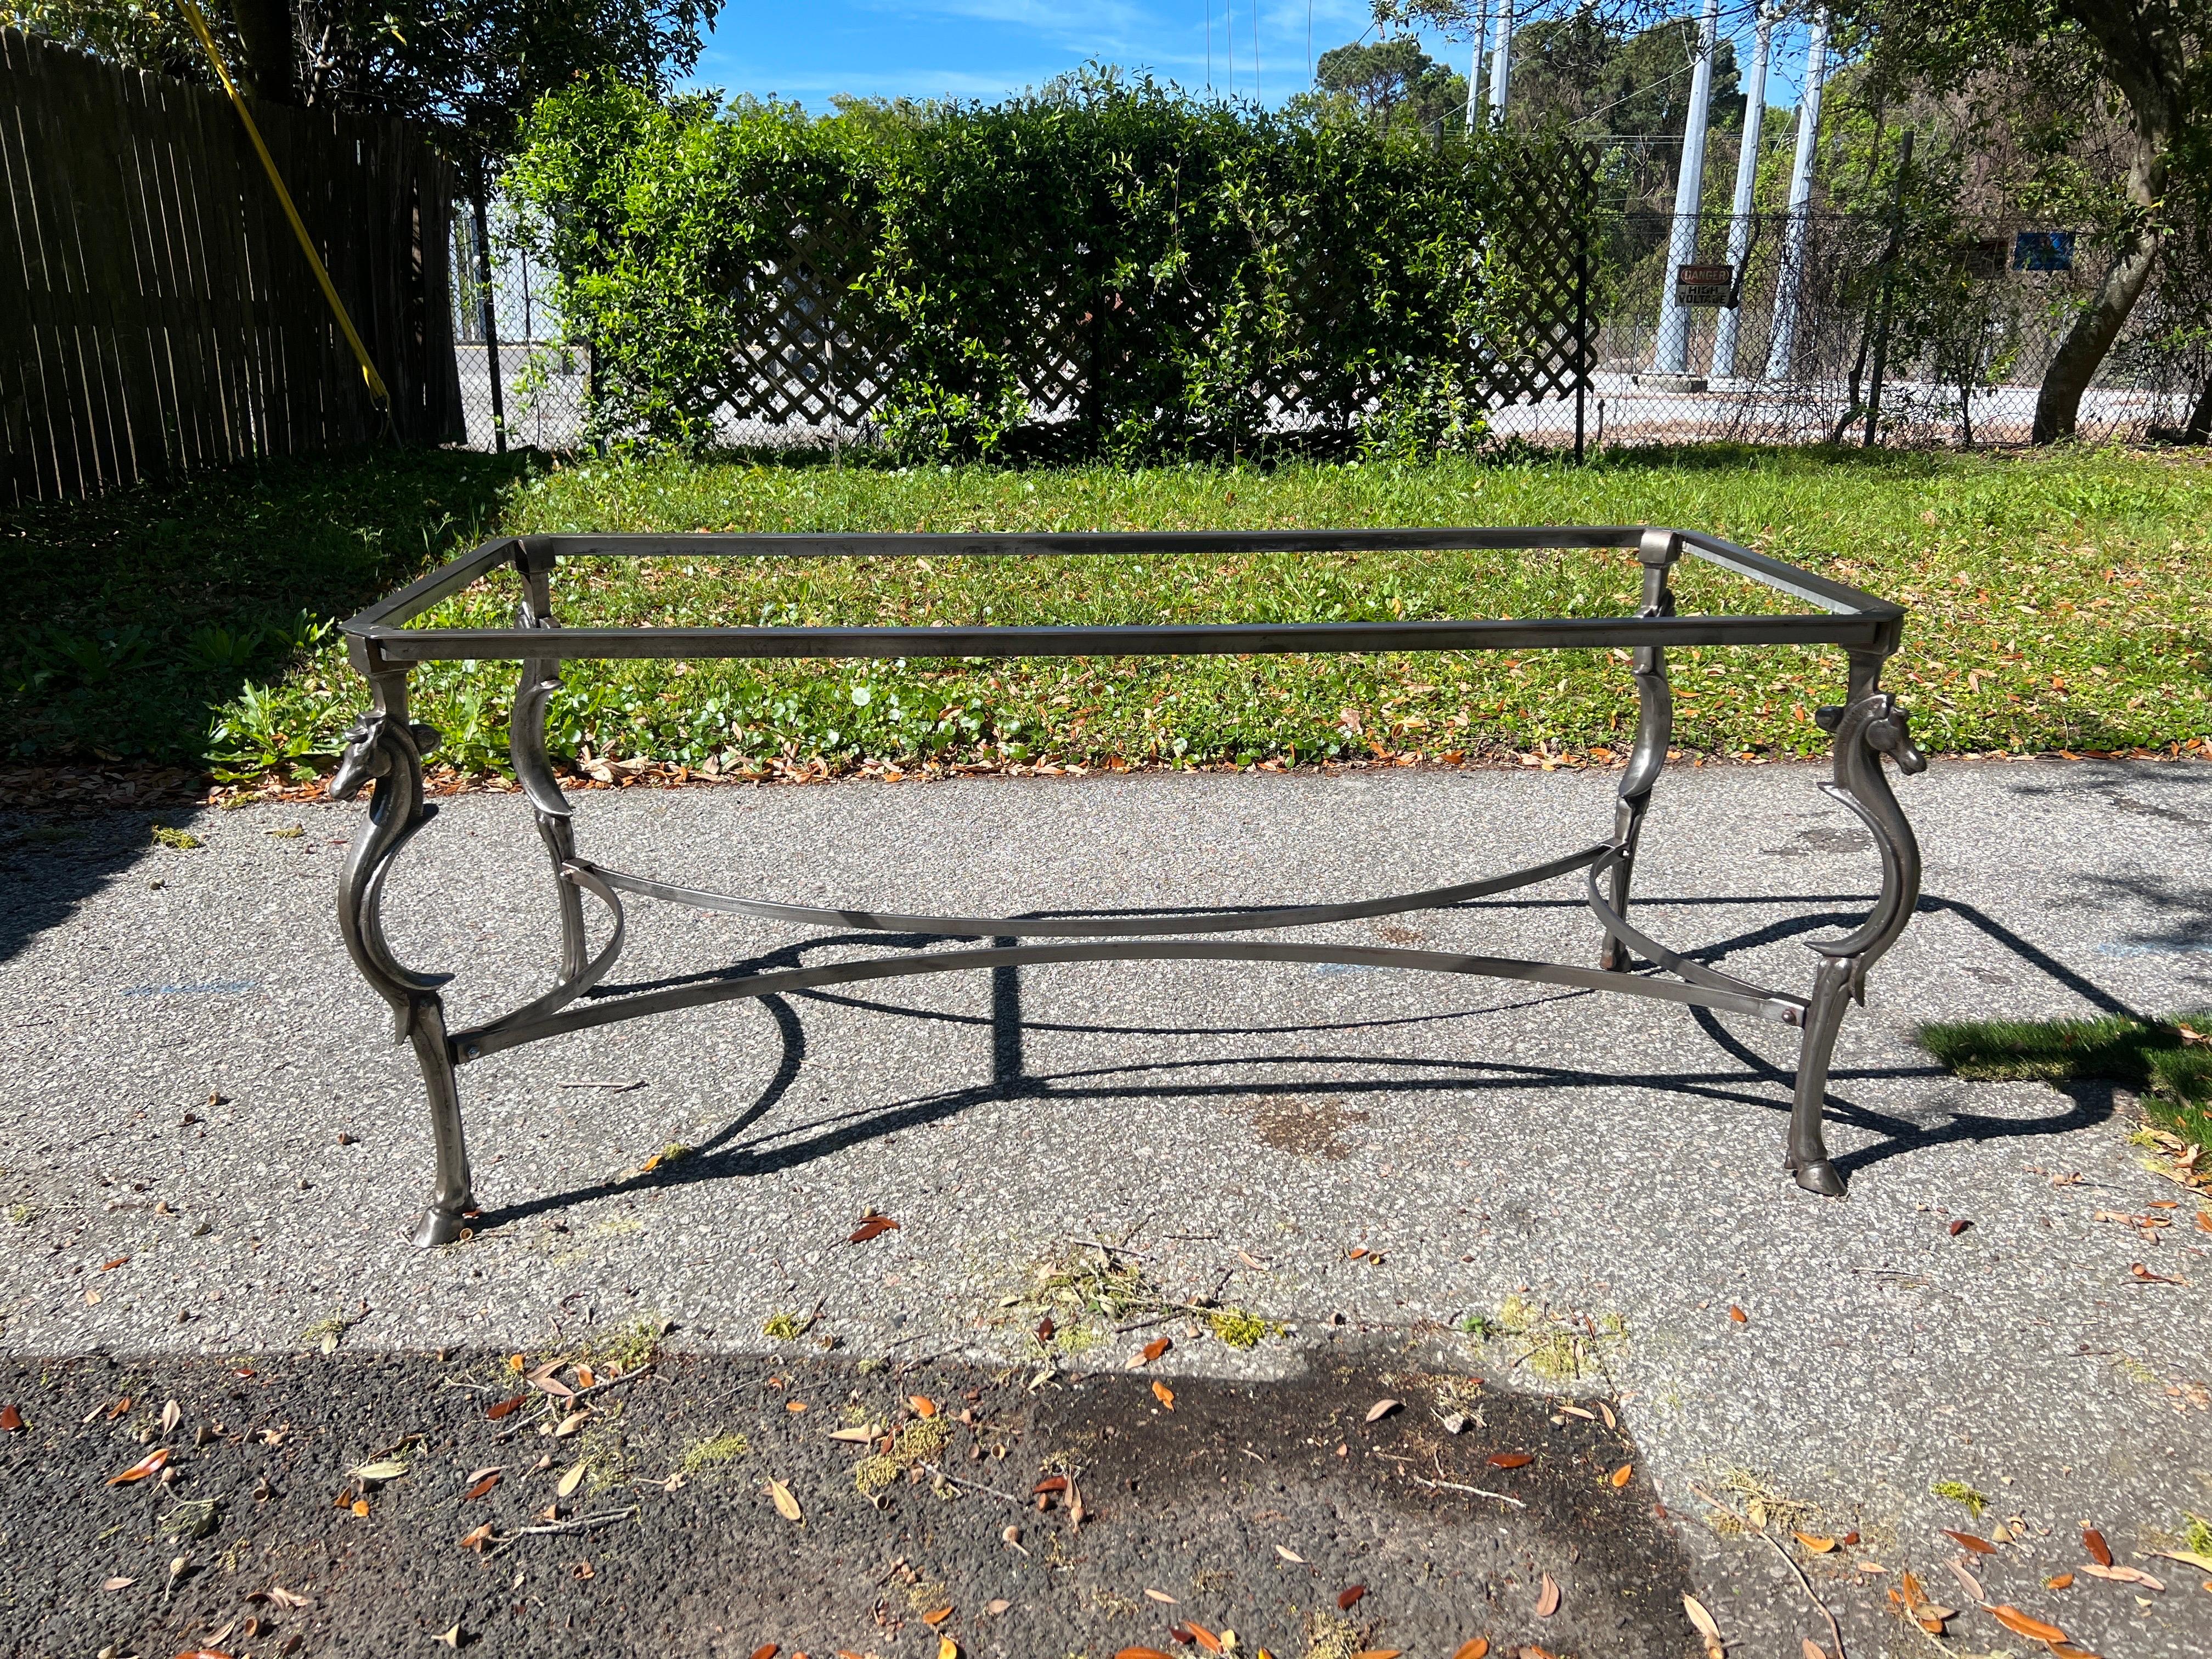 Italian, circa 1950. Attributed to the workshop of Maison Jansen or Maison Ramsey. 

A mid century dining table constructed in solid steel. This heavy and fine quality piece featured a steel frame, a cross hatch detail curved x stretcher, four horse